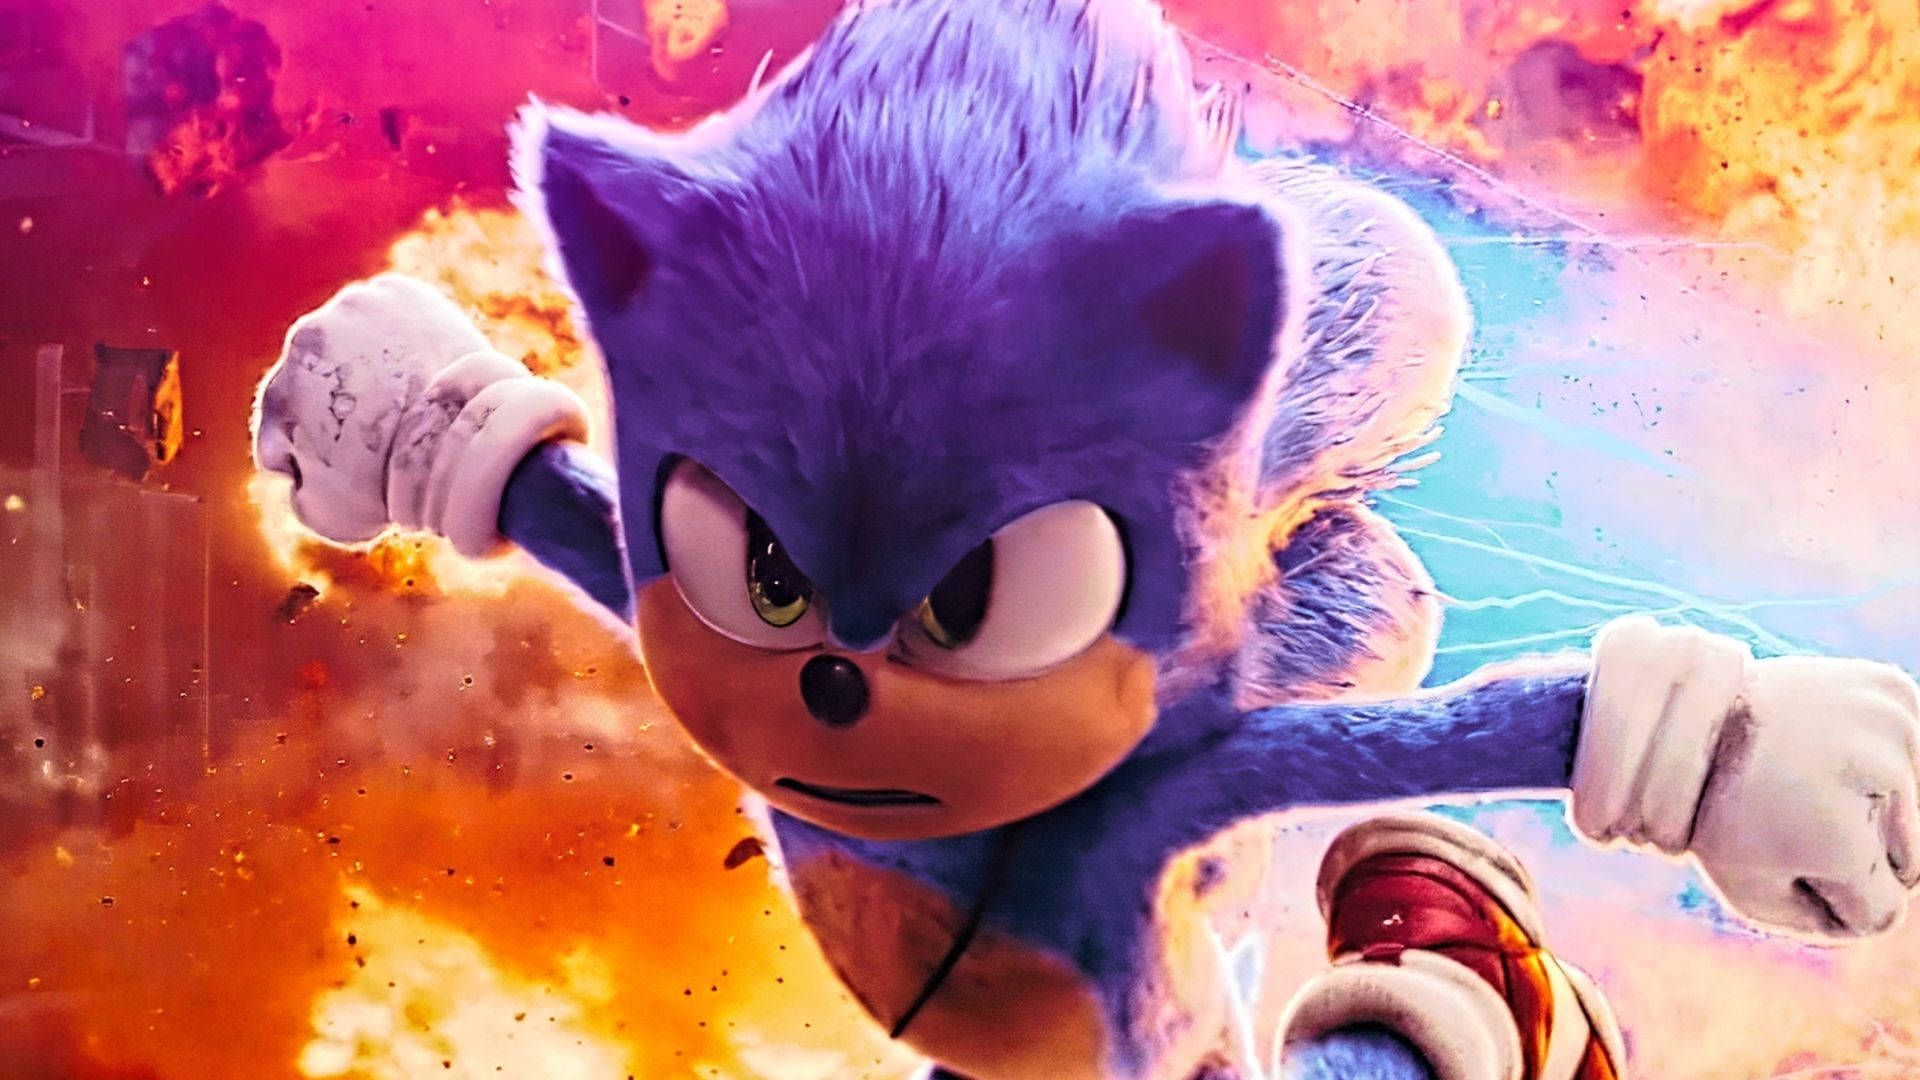 Sonic The Hedgehog Wallpaper for FREE